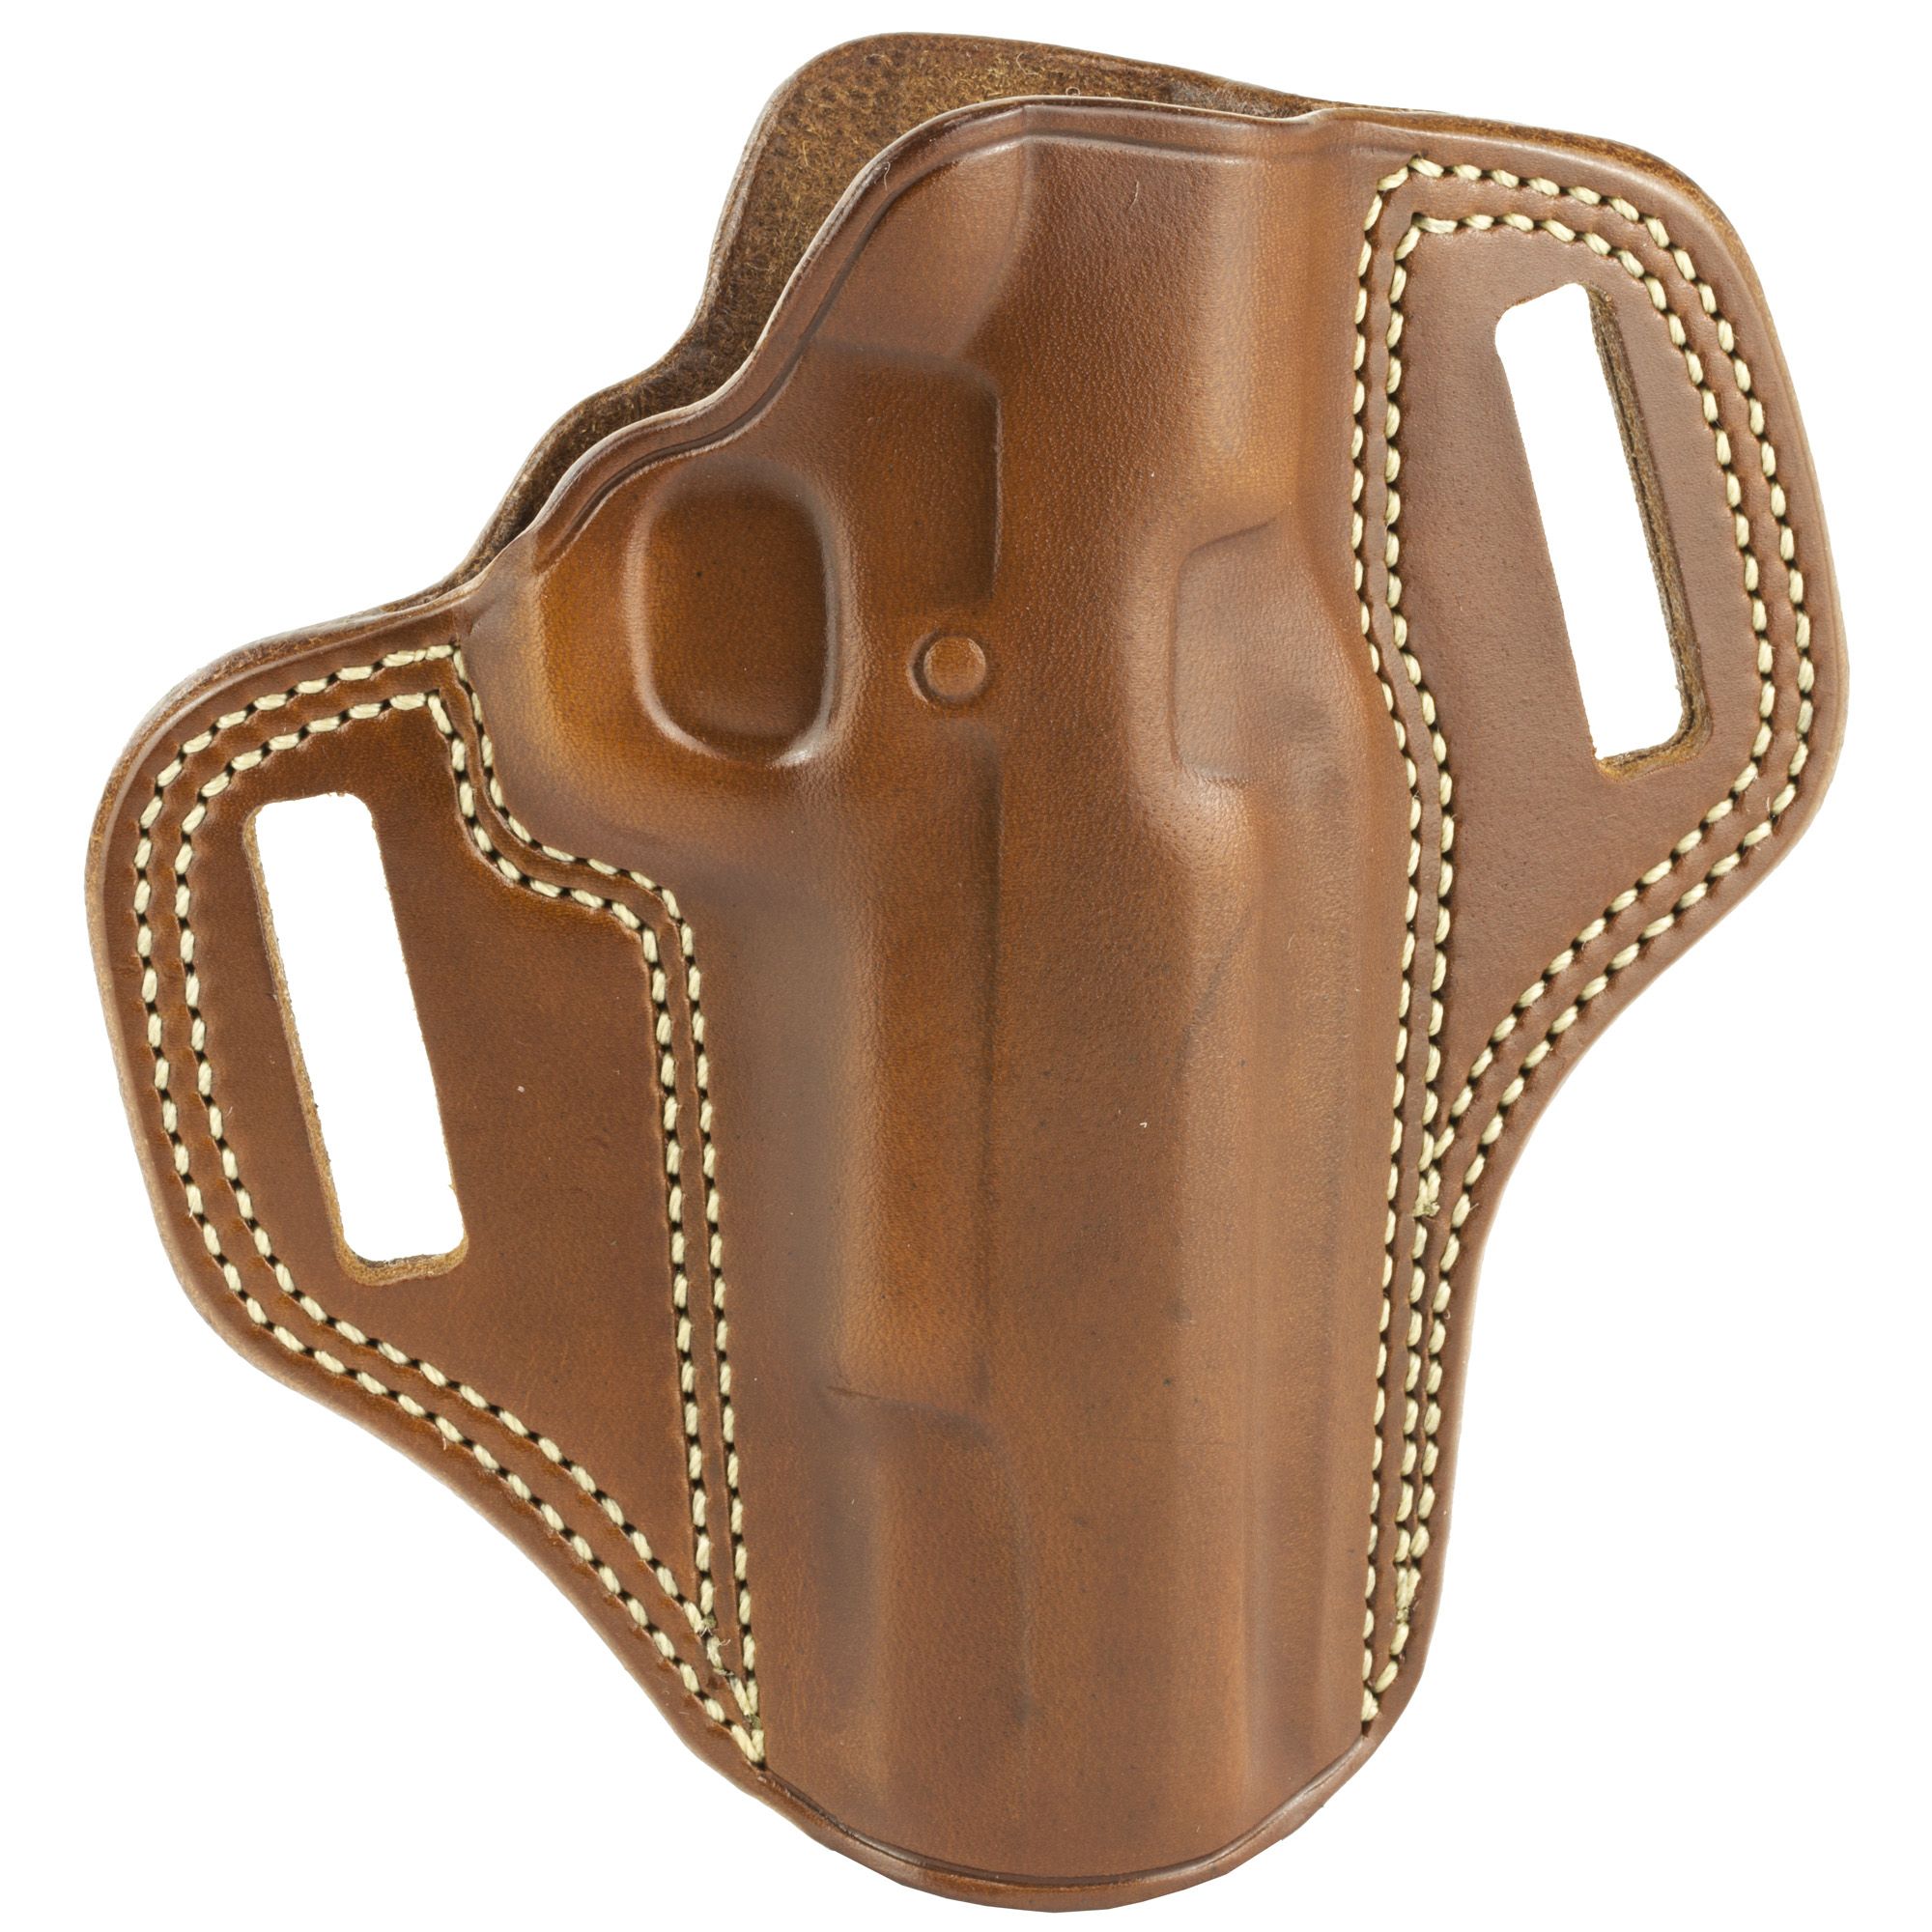 Galco Combat Master Concealment Holster - Right Hand Tan 1911 : CM212